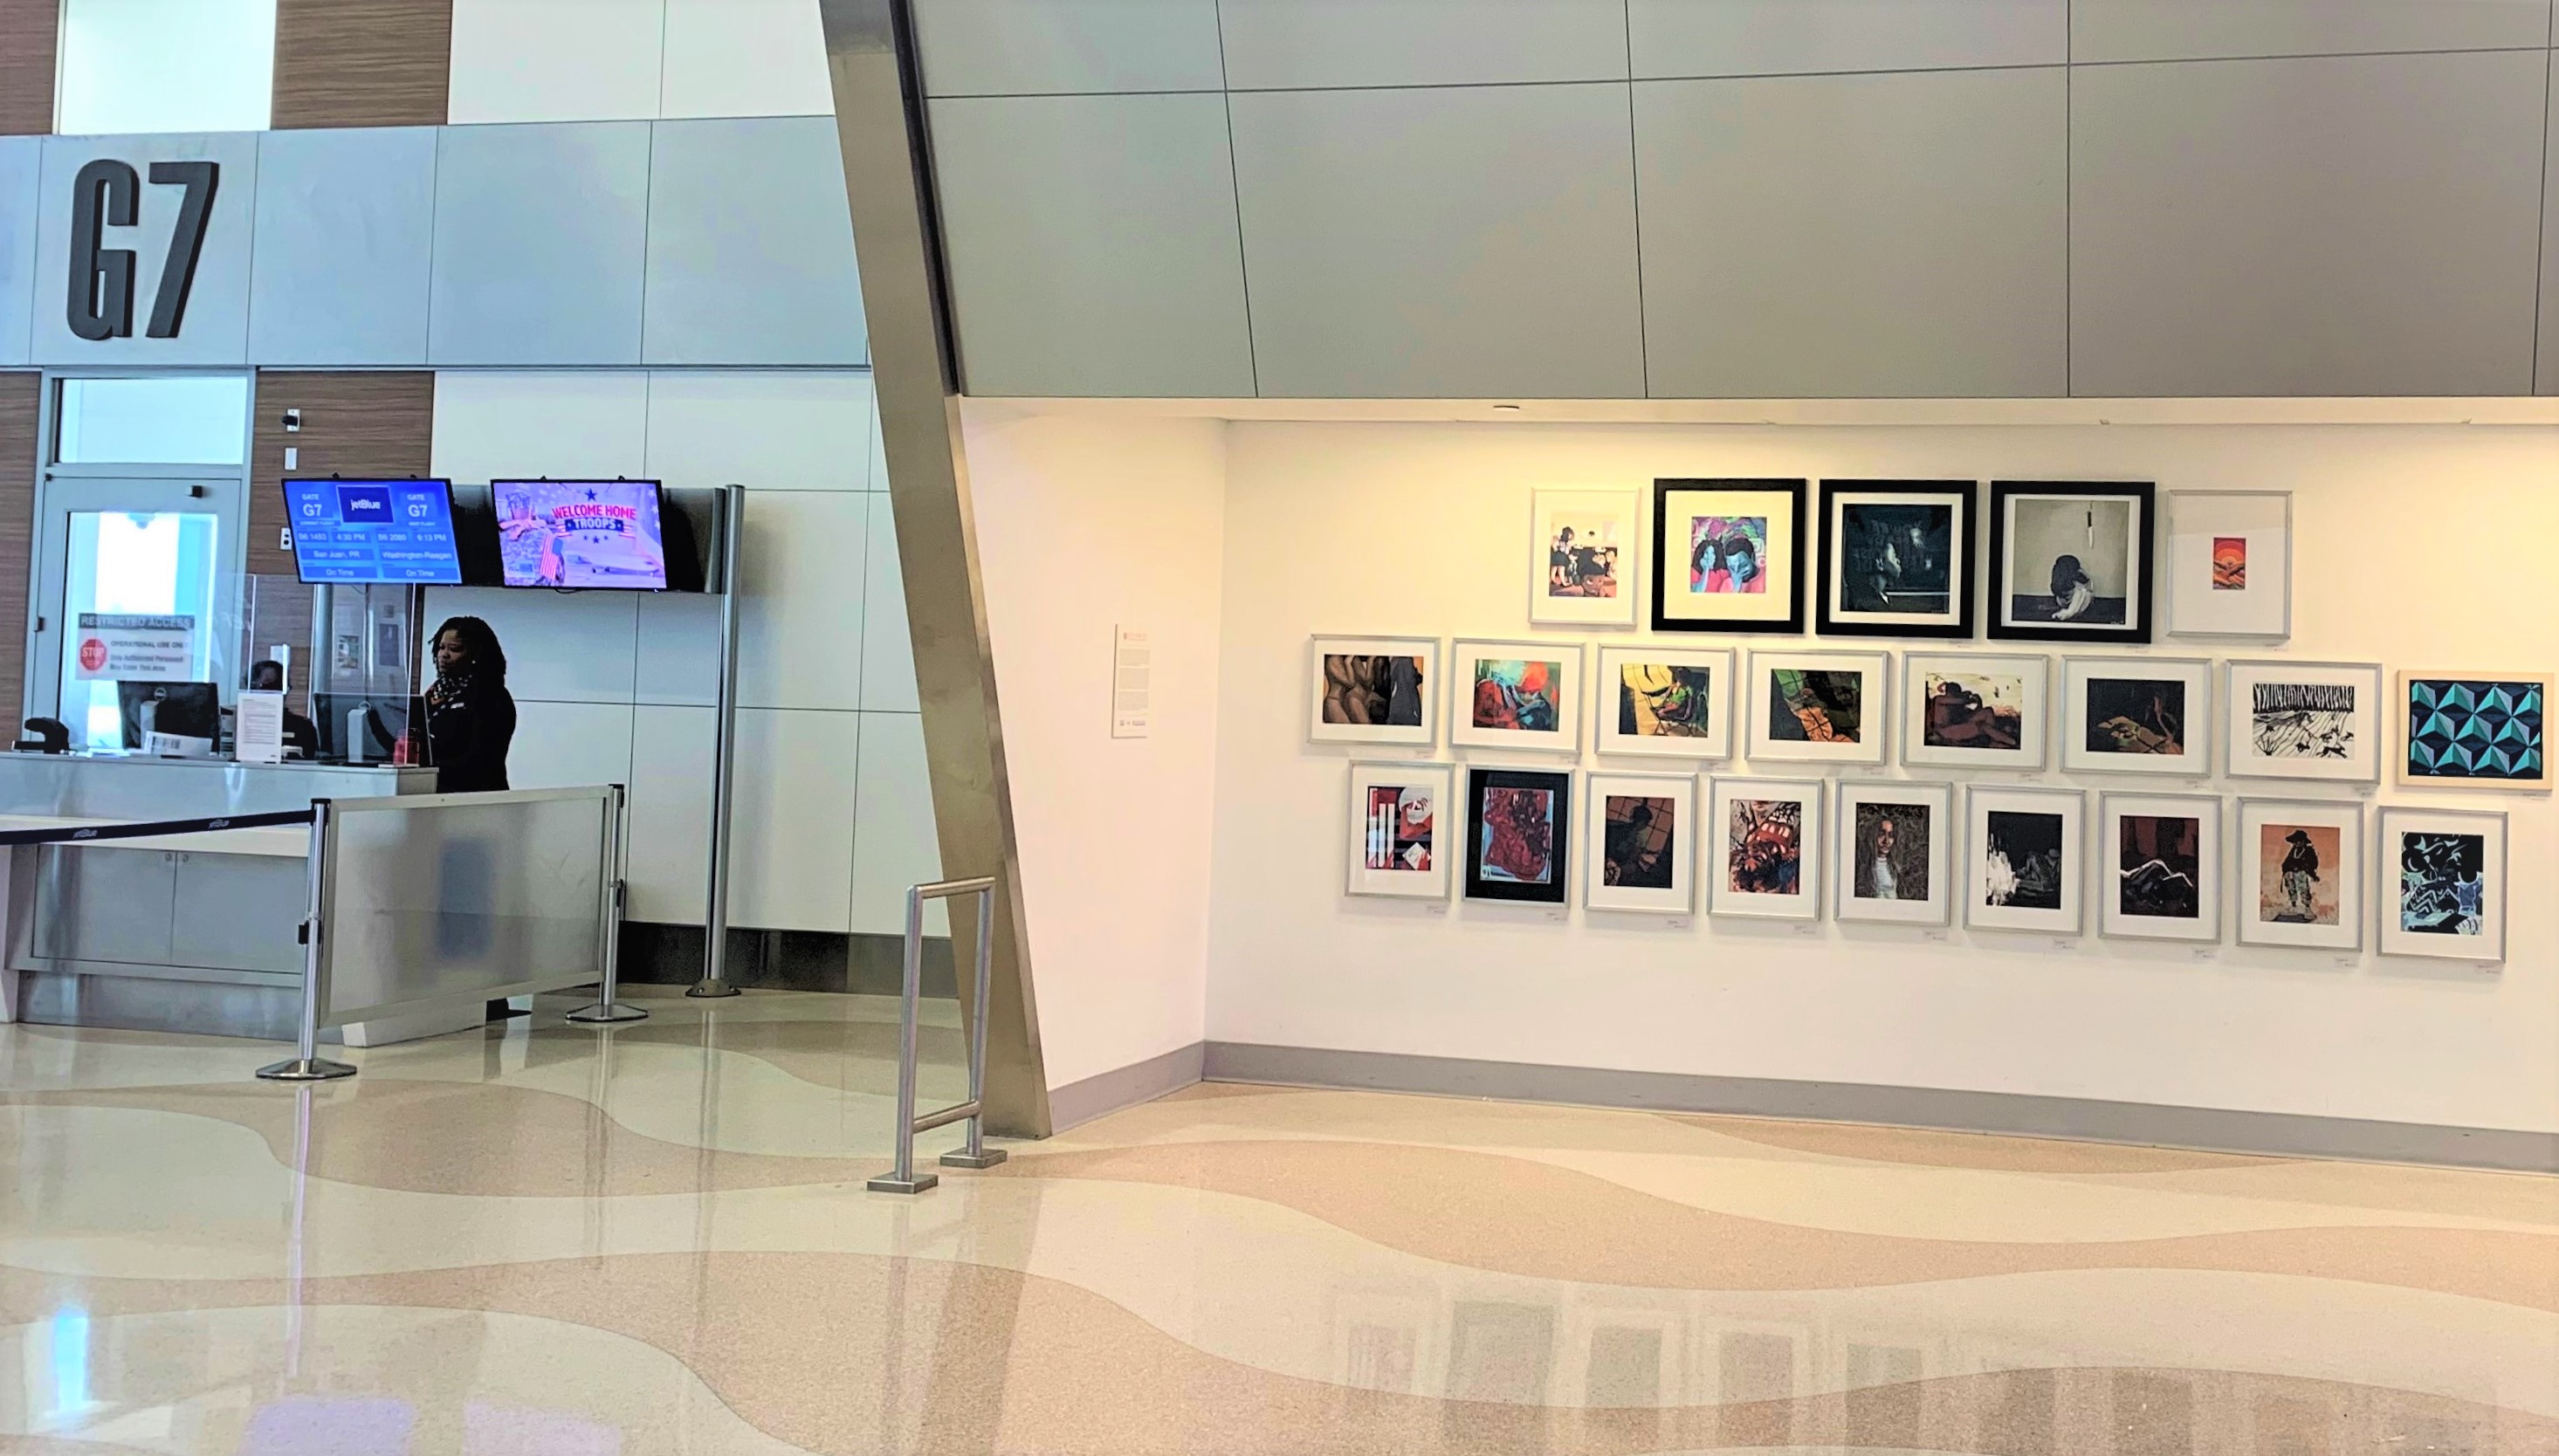 The exhibition is located in Terminal 4, Concourse G (post-security) and features high-quality giclee prints of artworks in various mediums.